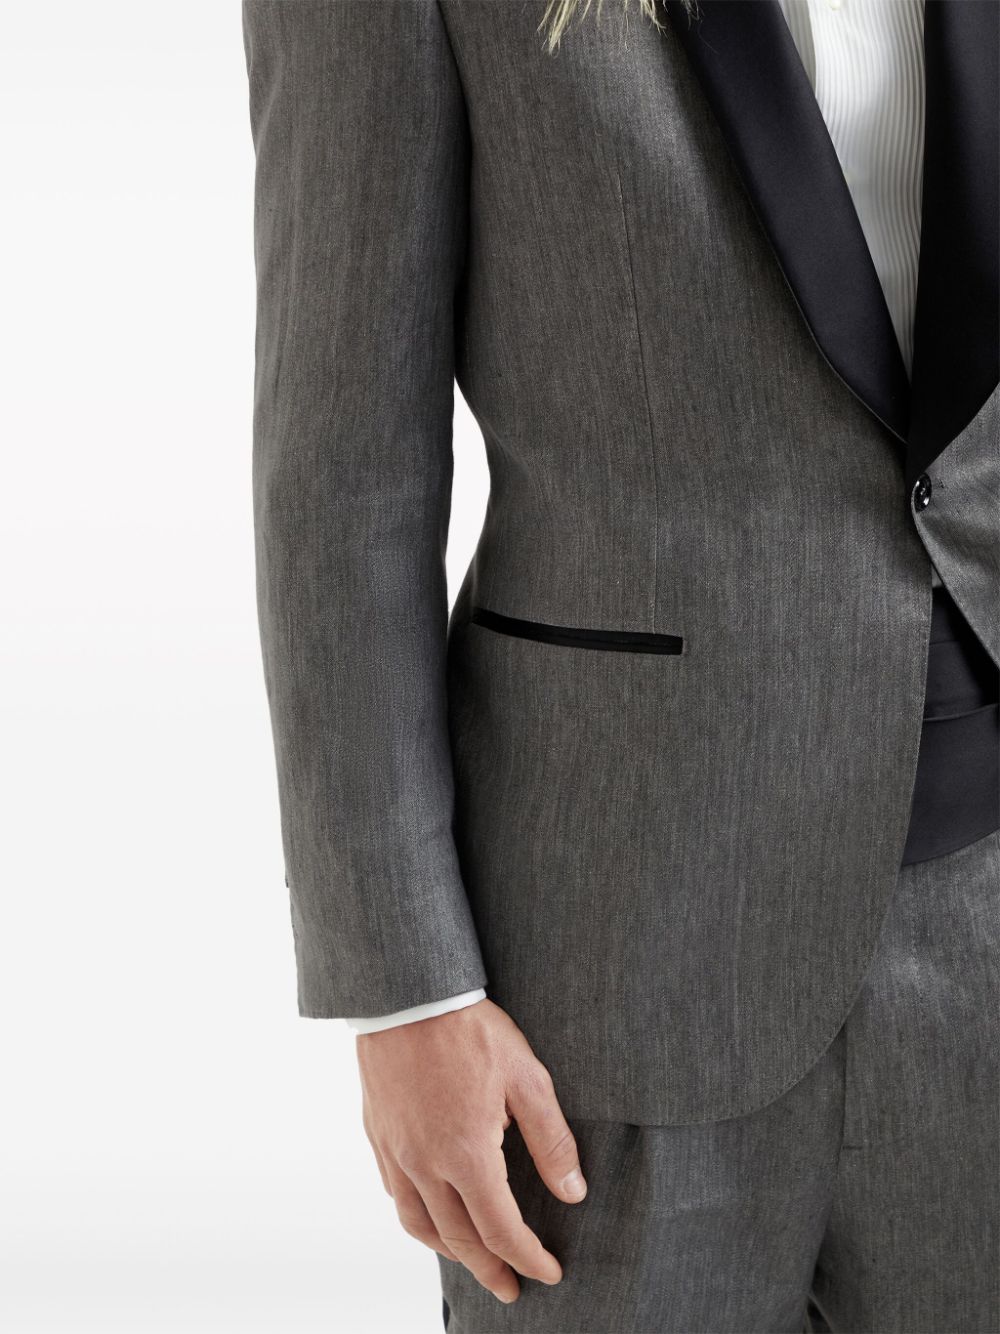 BRUNELLO CUCINELLI Men's Gray Linen Smoking Suit with Scarf Lapels and Sustainable Materials for SS24